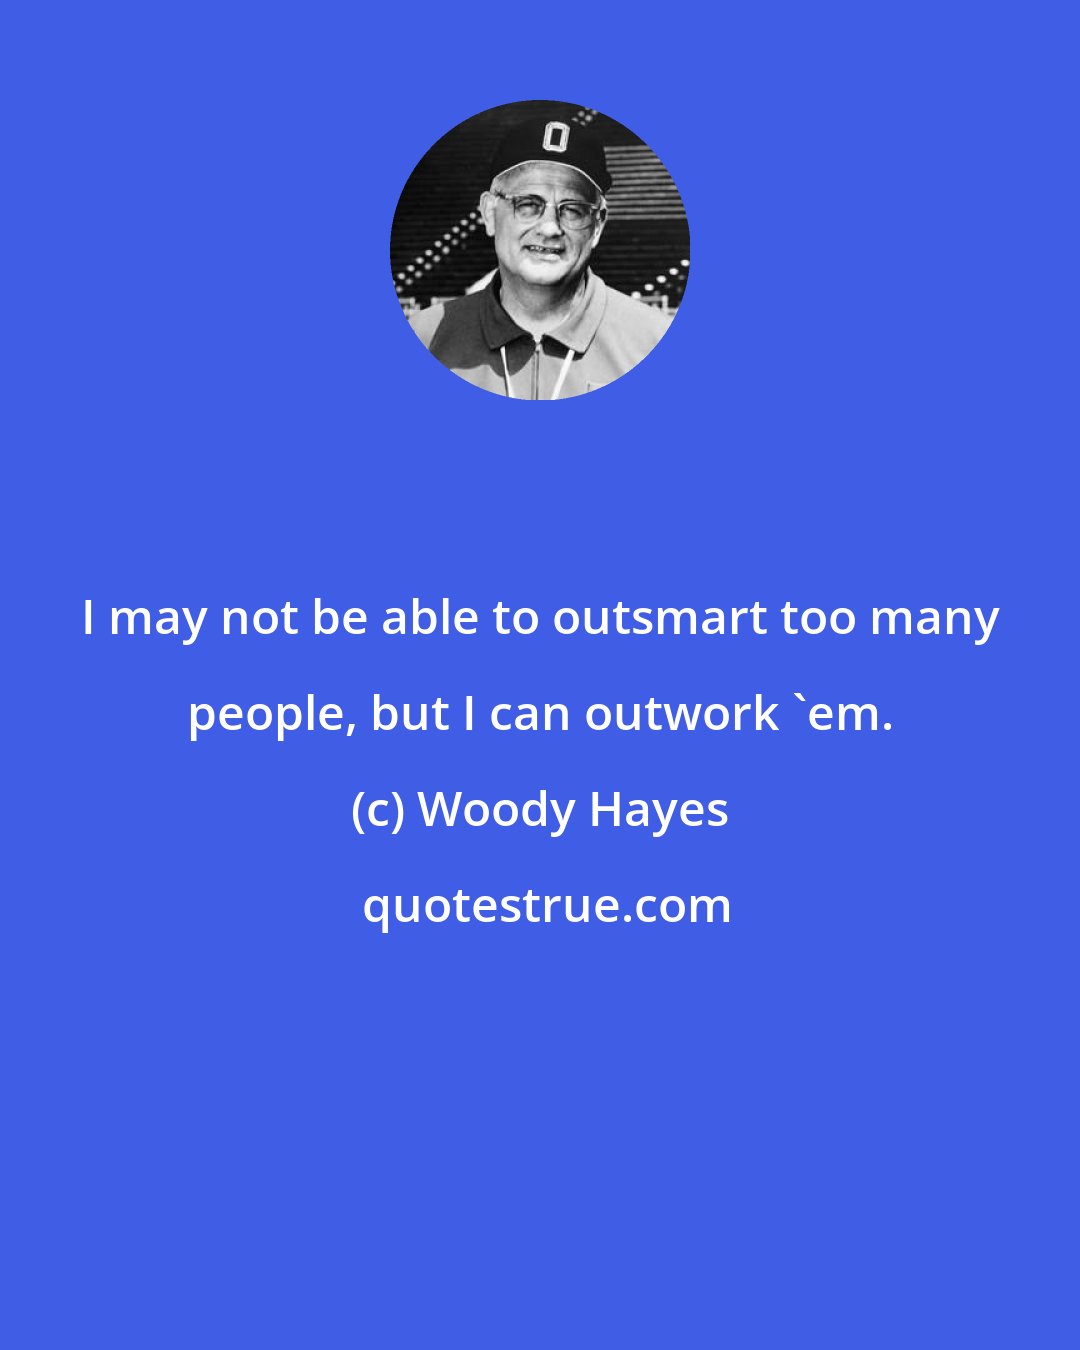 Woody Hayes: I may not be able to outsmart too many people, but I can outwork 'em.